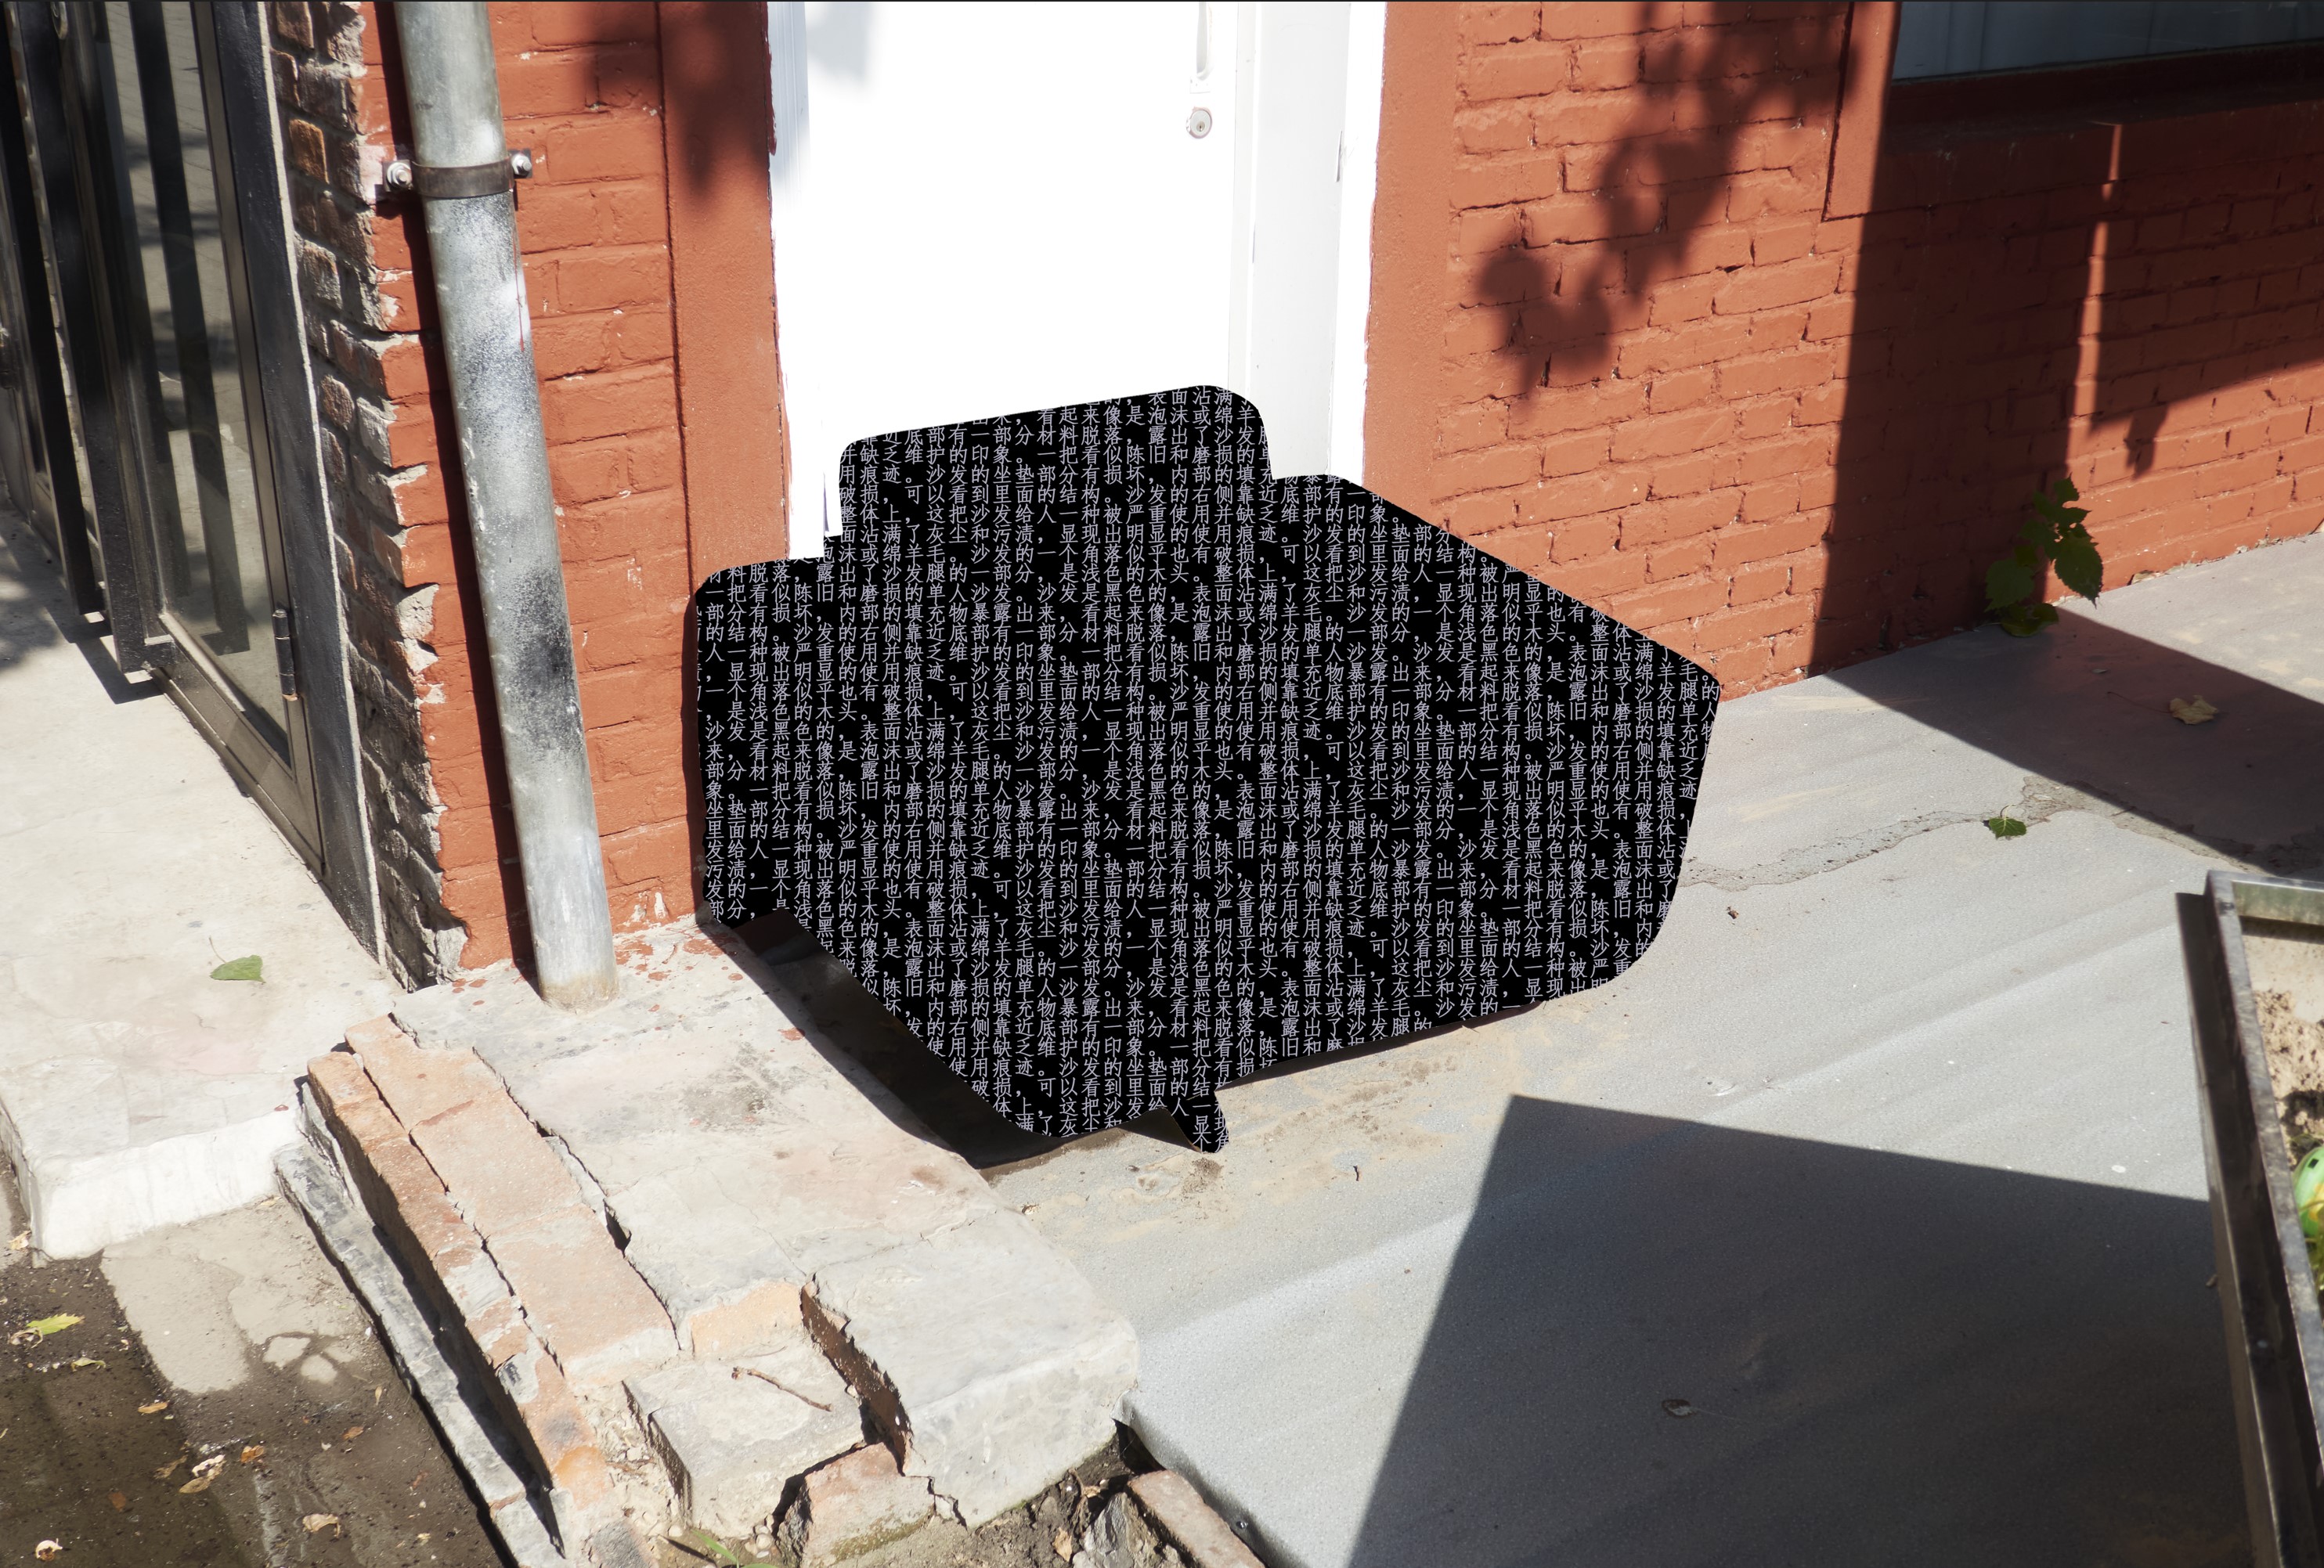 Image of one of Steven's photographs exhibited in his thesis work. The photograph shows an airmchair up against the exterior of a building. The chair has been redacted and is instead shown in black with white Chinese characters that describe the chair.